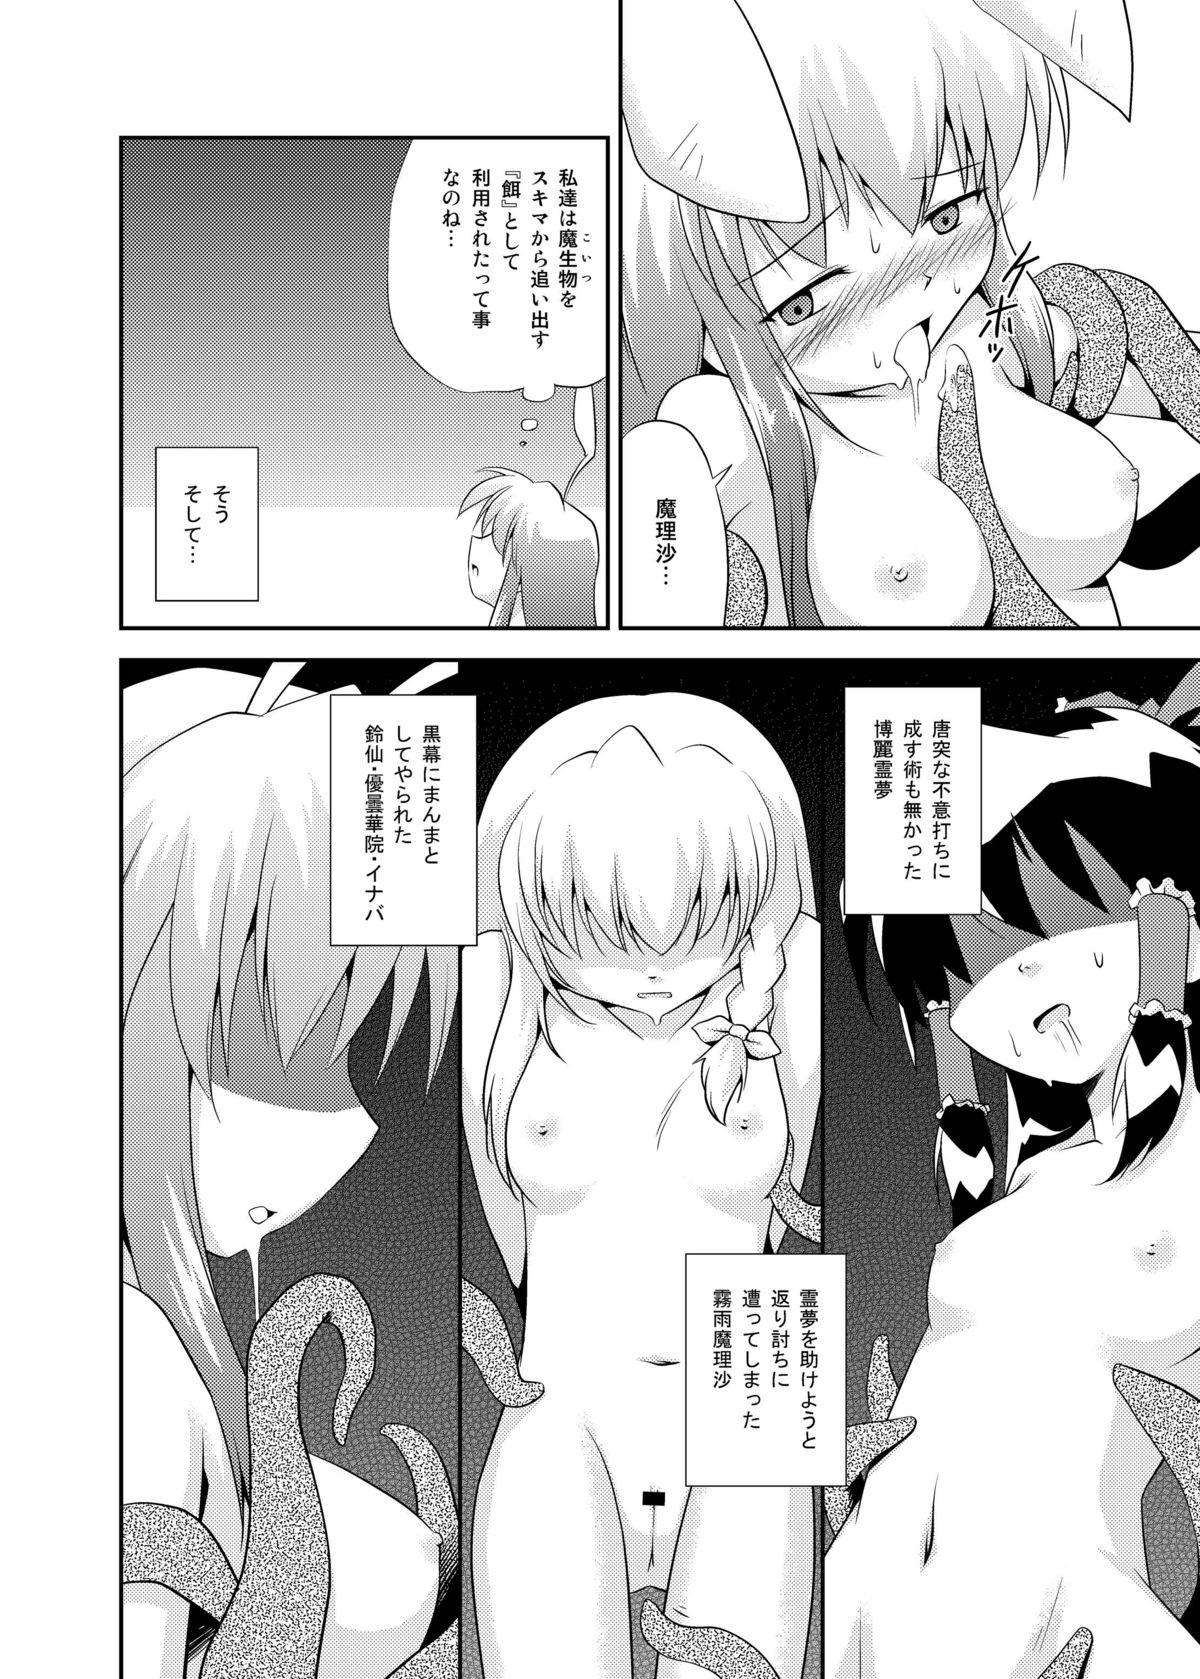 Jerking DISARM CLOTHES - Touhou project 18 Porn - Page 24